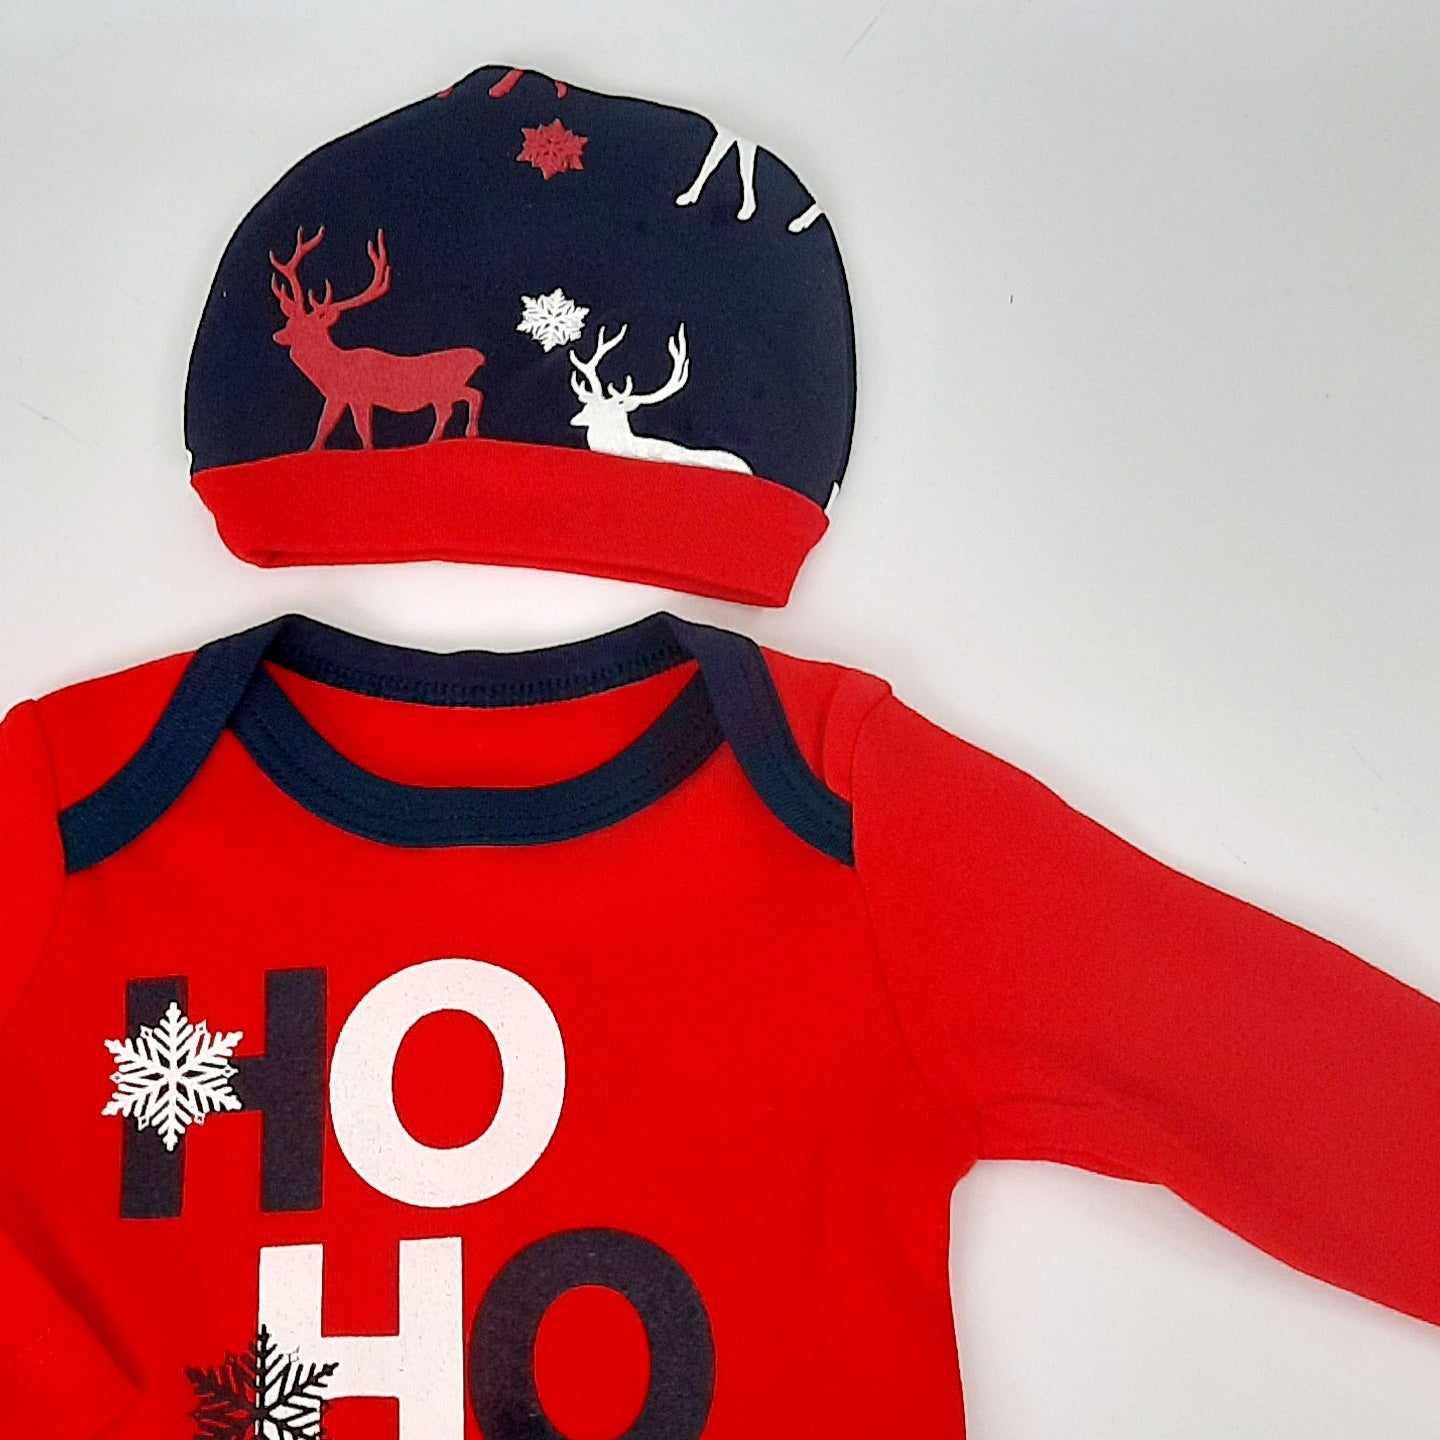 Baby Christmas Red Top Pants & Beanie Set